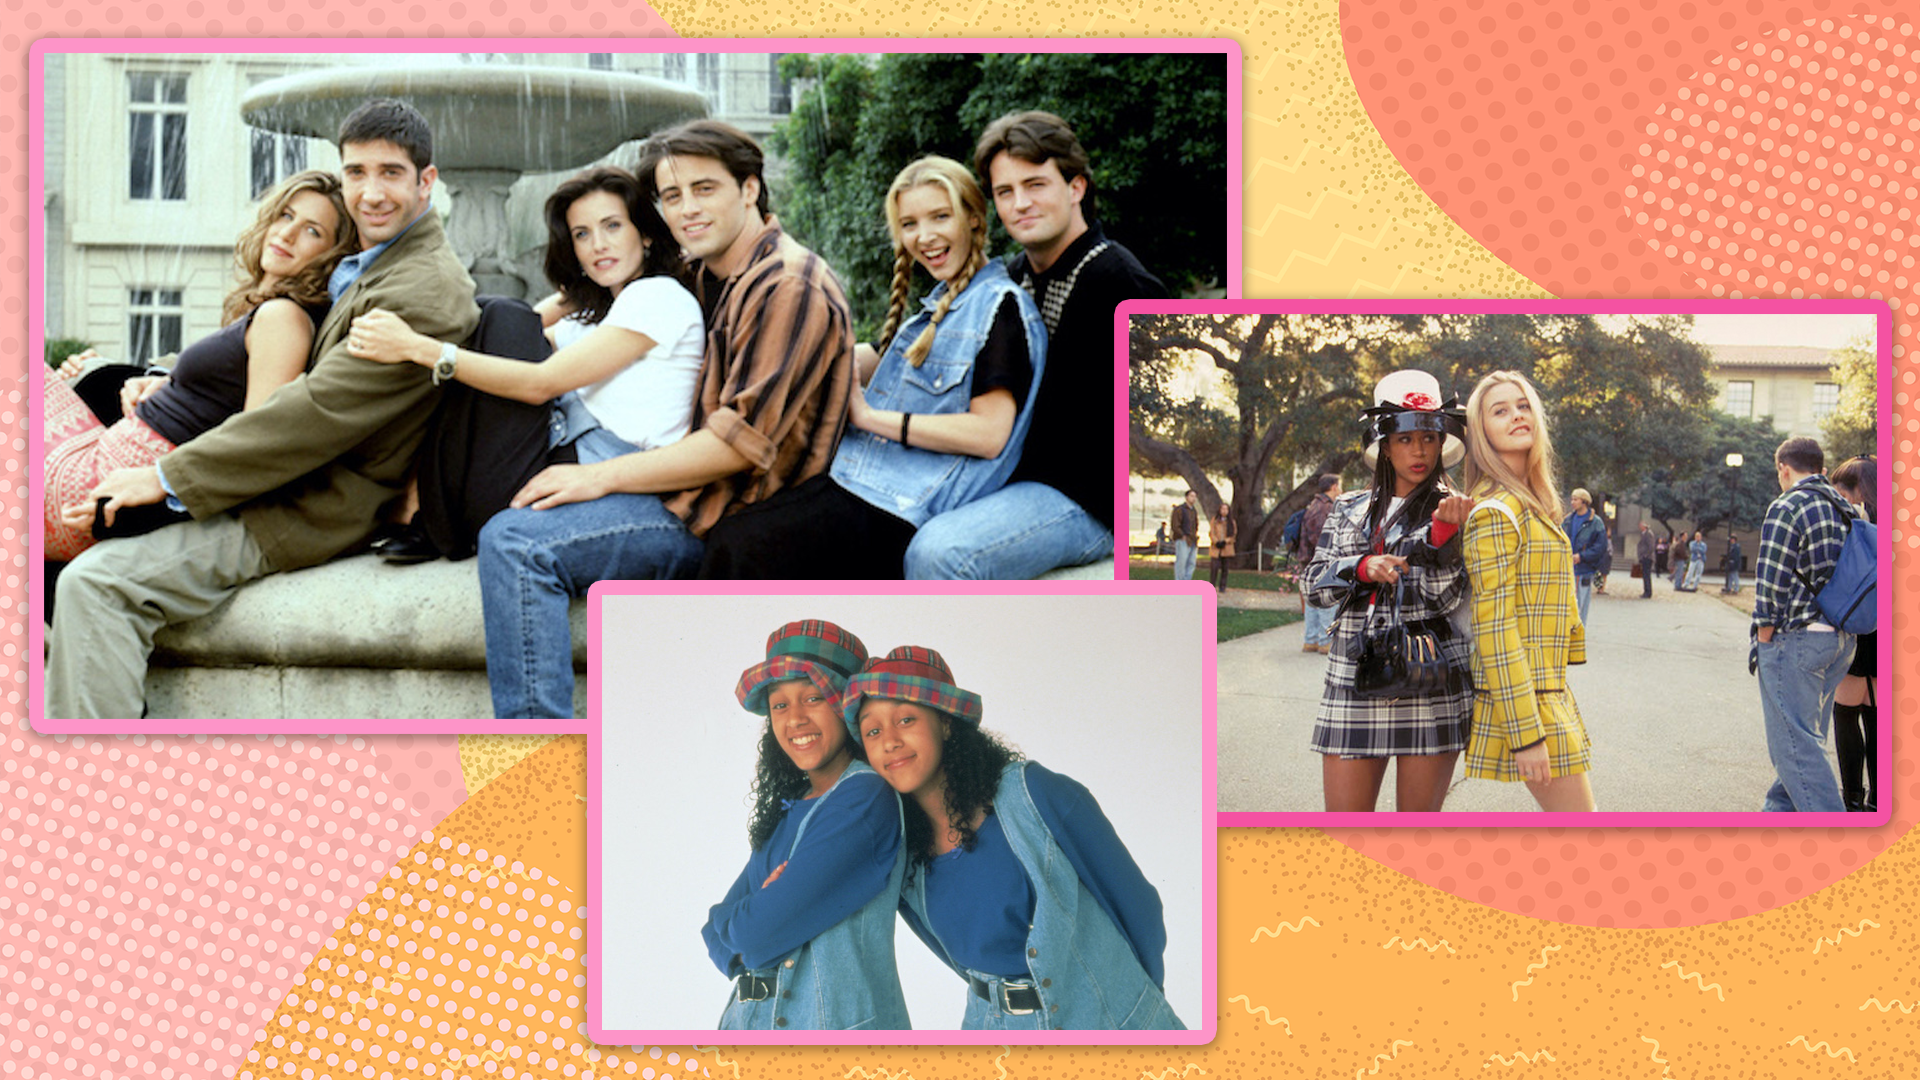 Relive Your Favorite ’90s Memories With These Halloween Costumes